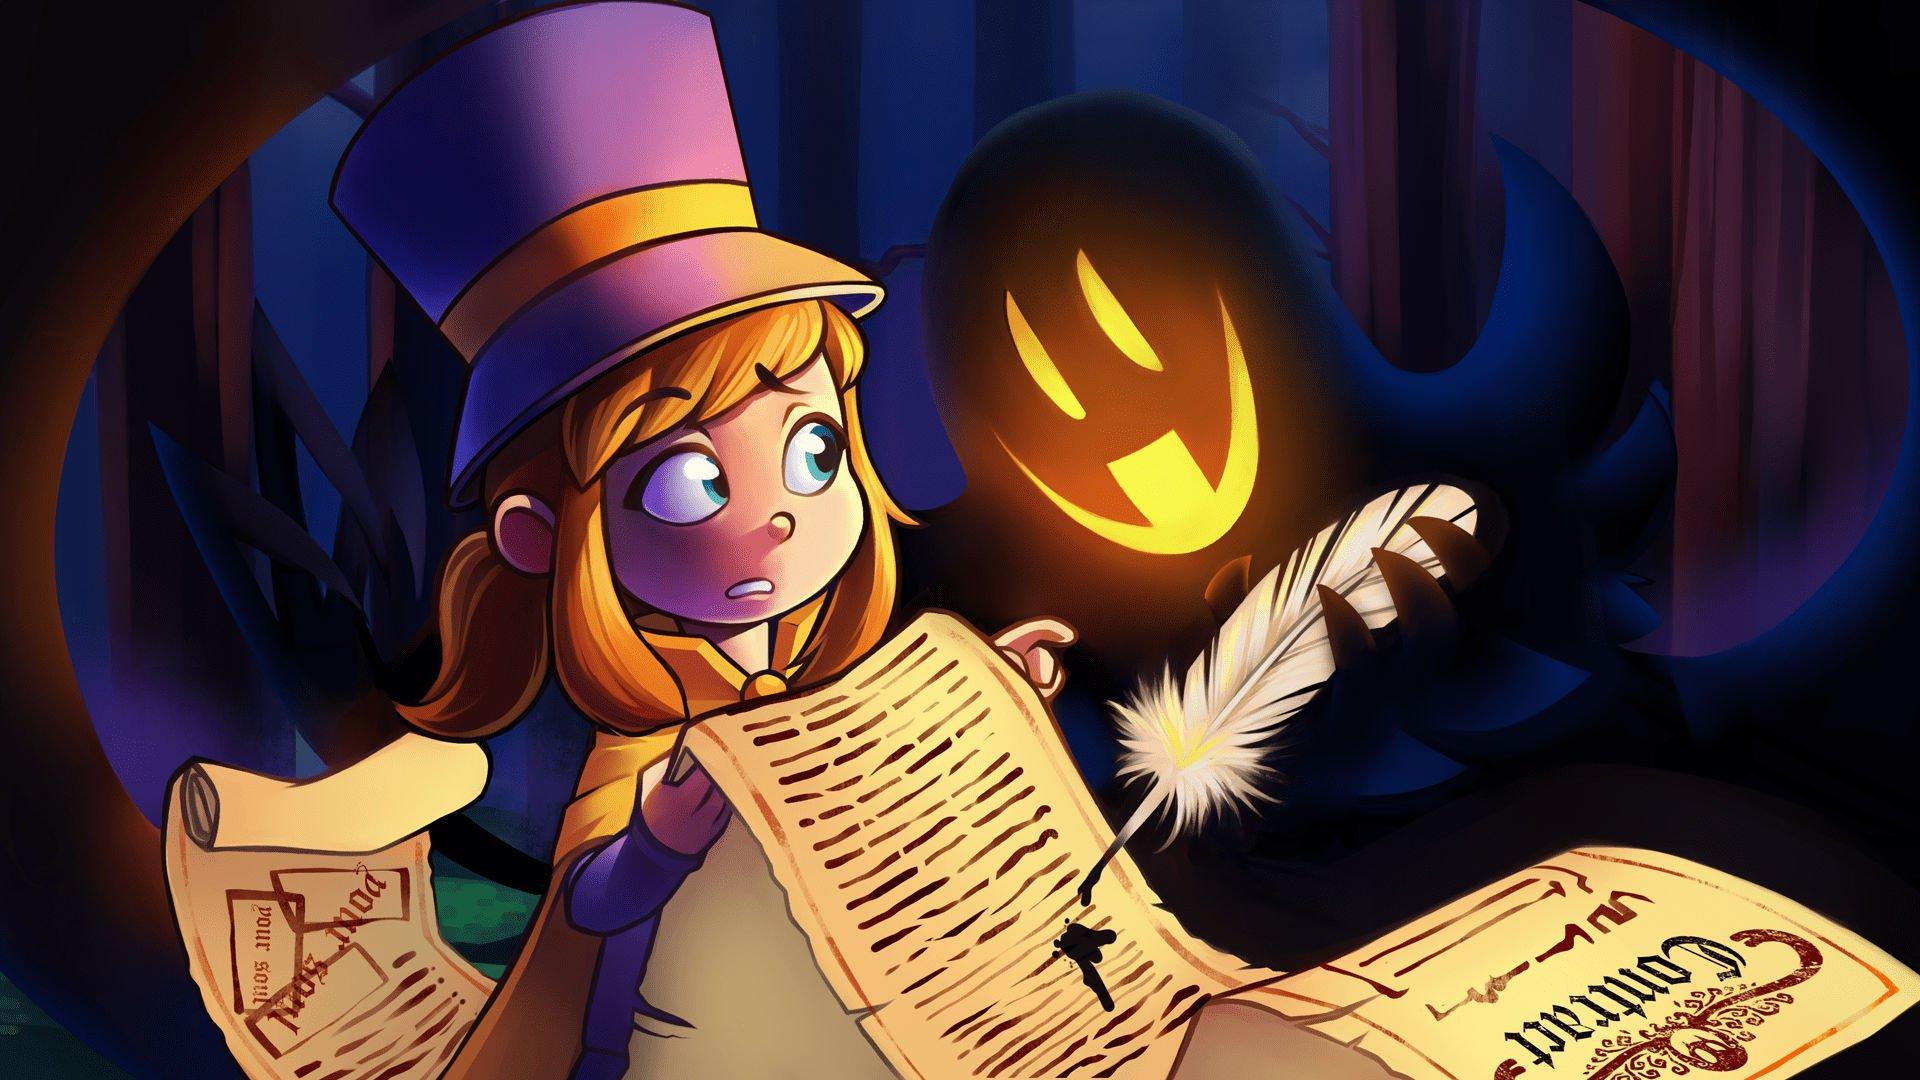 A Hat In Time is definitely not coming to Switch, despite hope